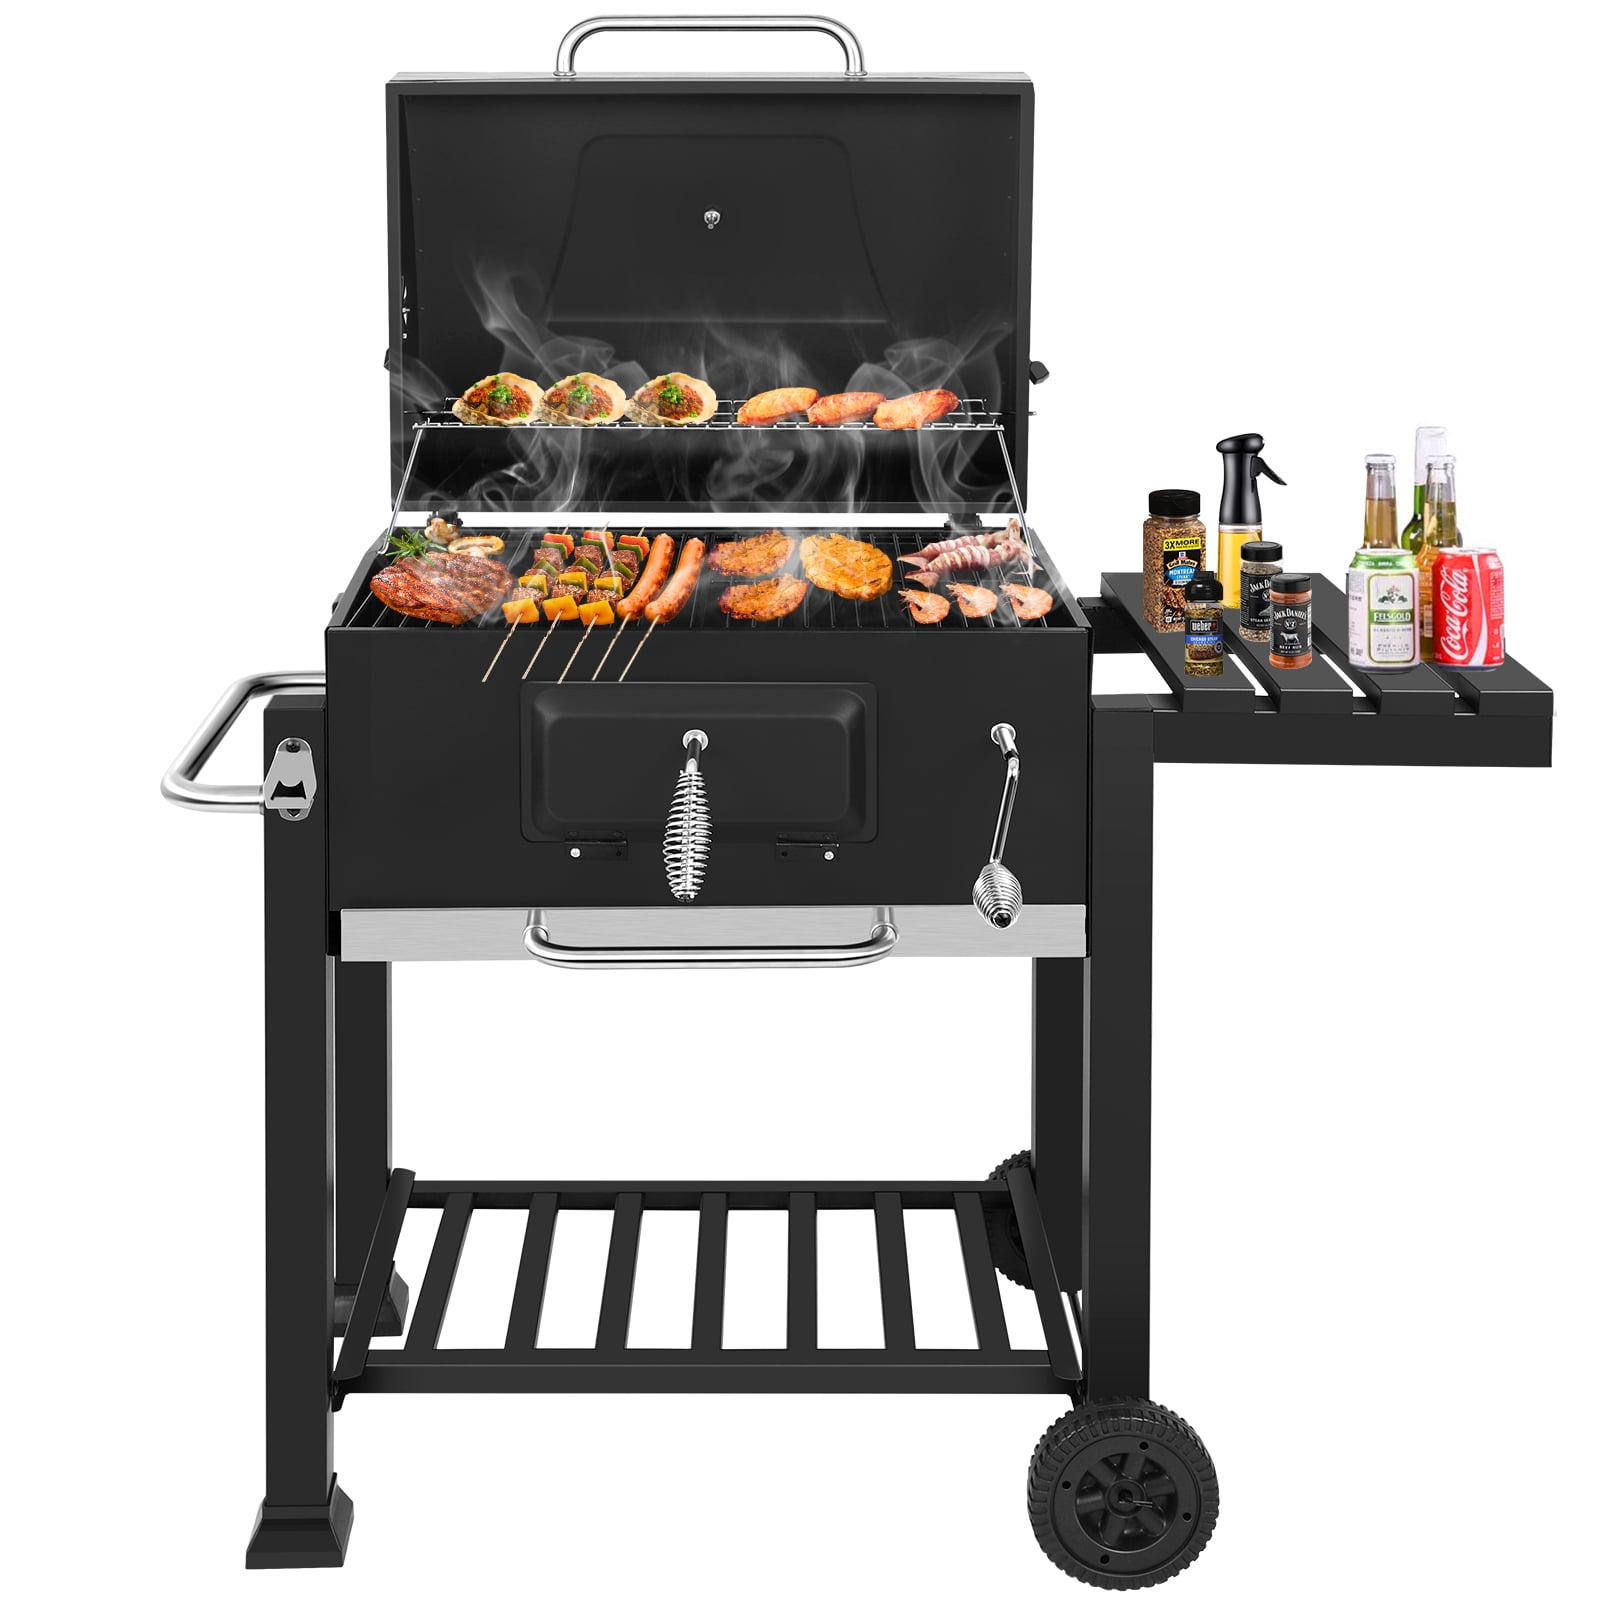 povući Diktat crkvena klupa  Keimprove Heavy Duty Stainless Charcoal Grill,Square Oven Charcoal  Grill,Offset Smoker with Cover,Deluxe BBQ Stove,for Outdoor Camping Picnic  Patio Backyard Cooking Party, Black - Walmart.com